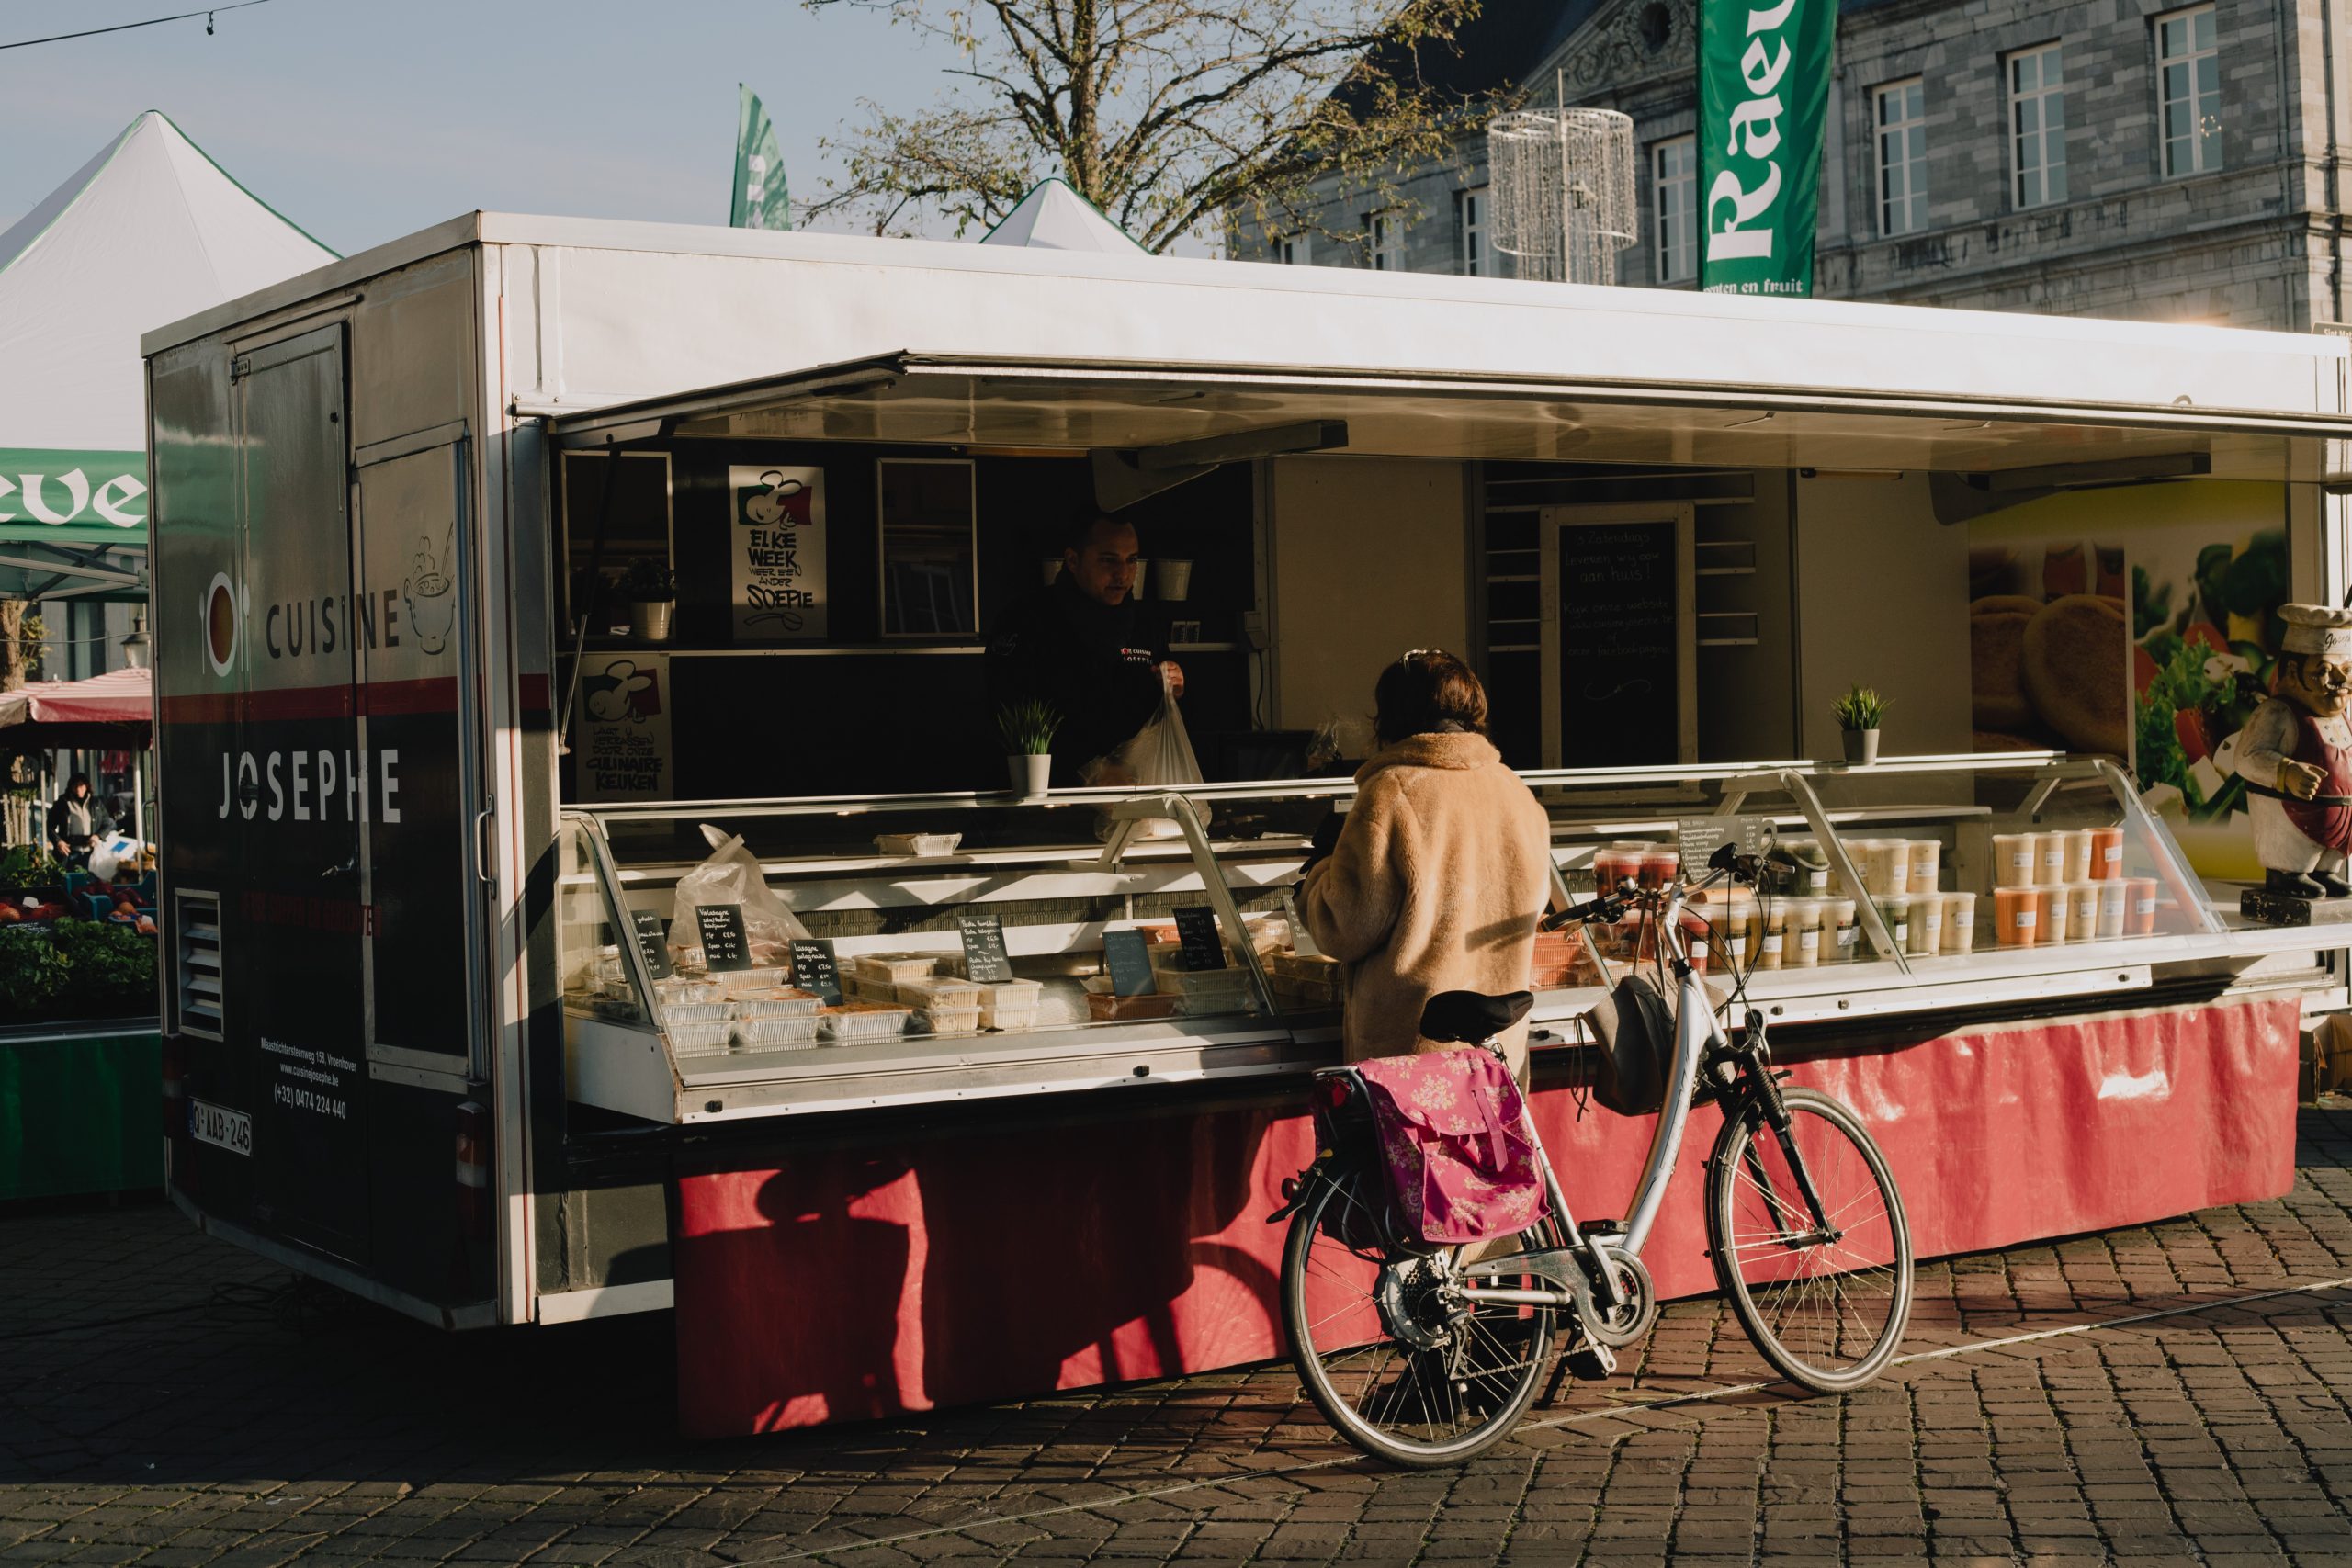 Outdoor food stand with girl on her bicycle making a purchase